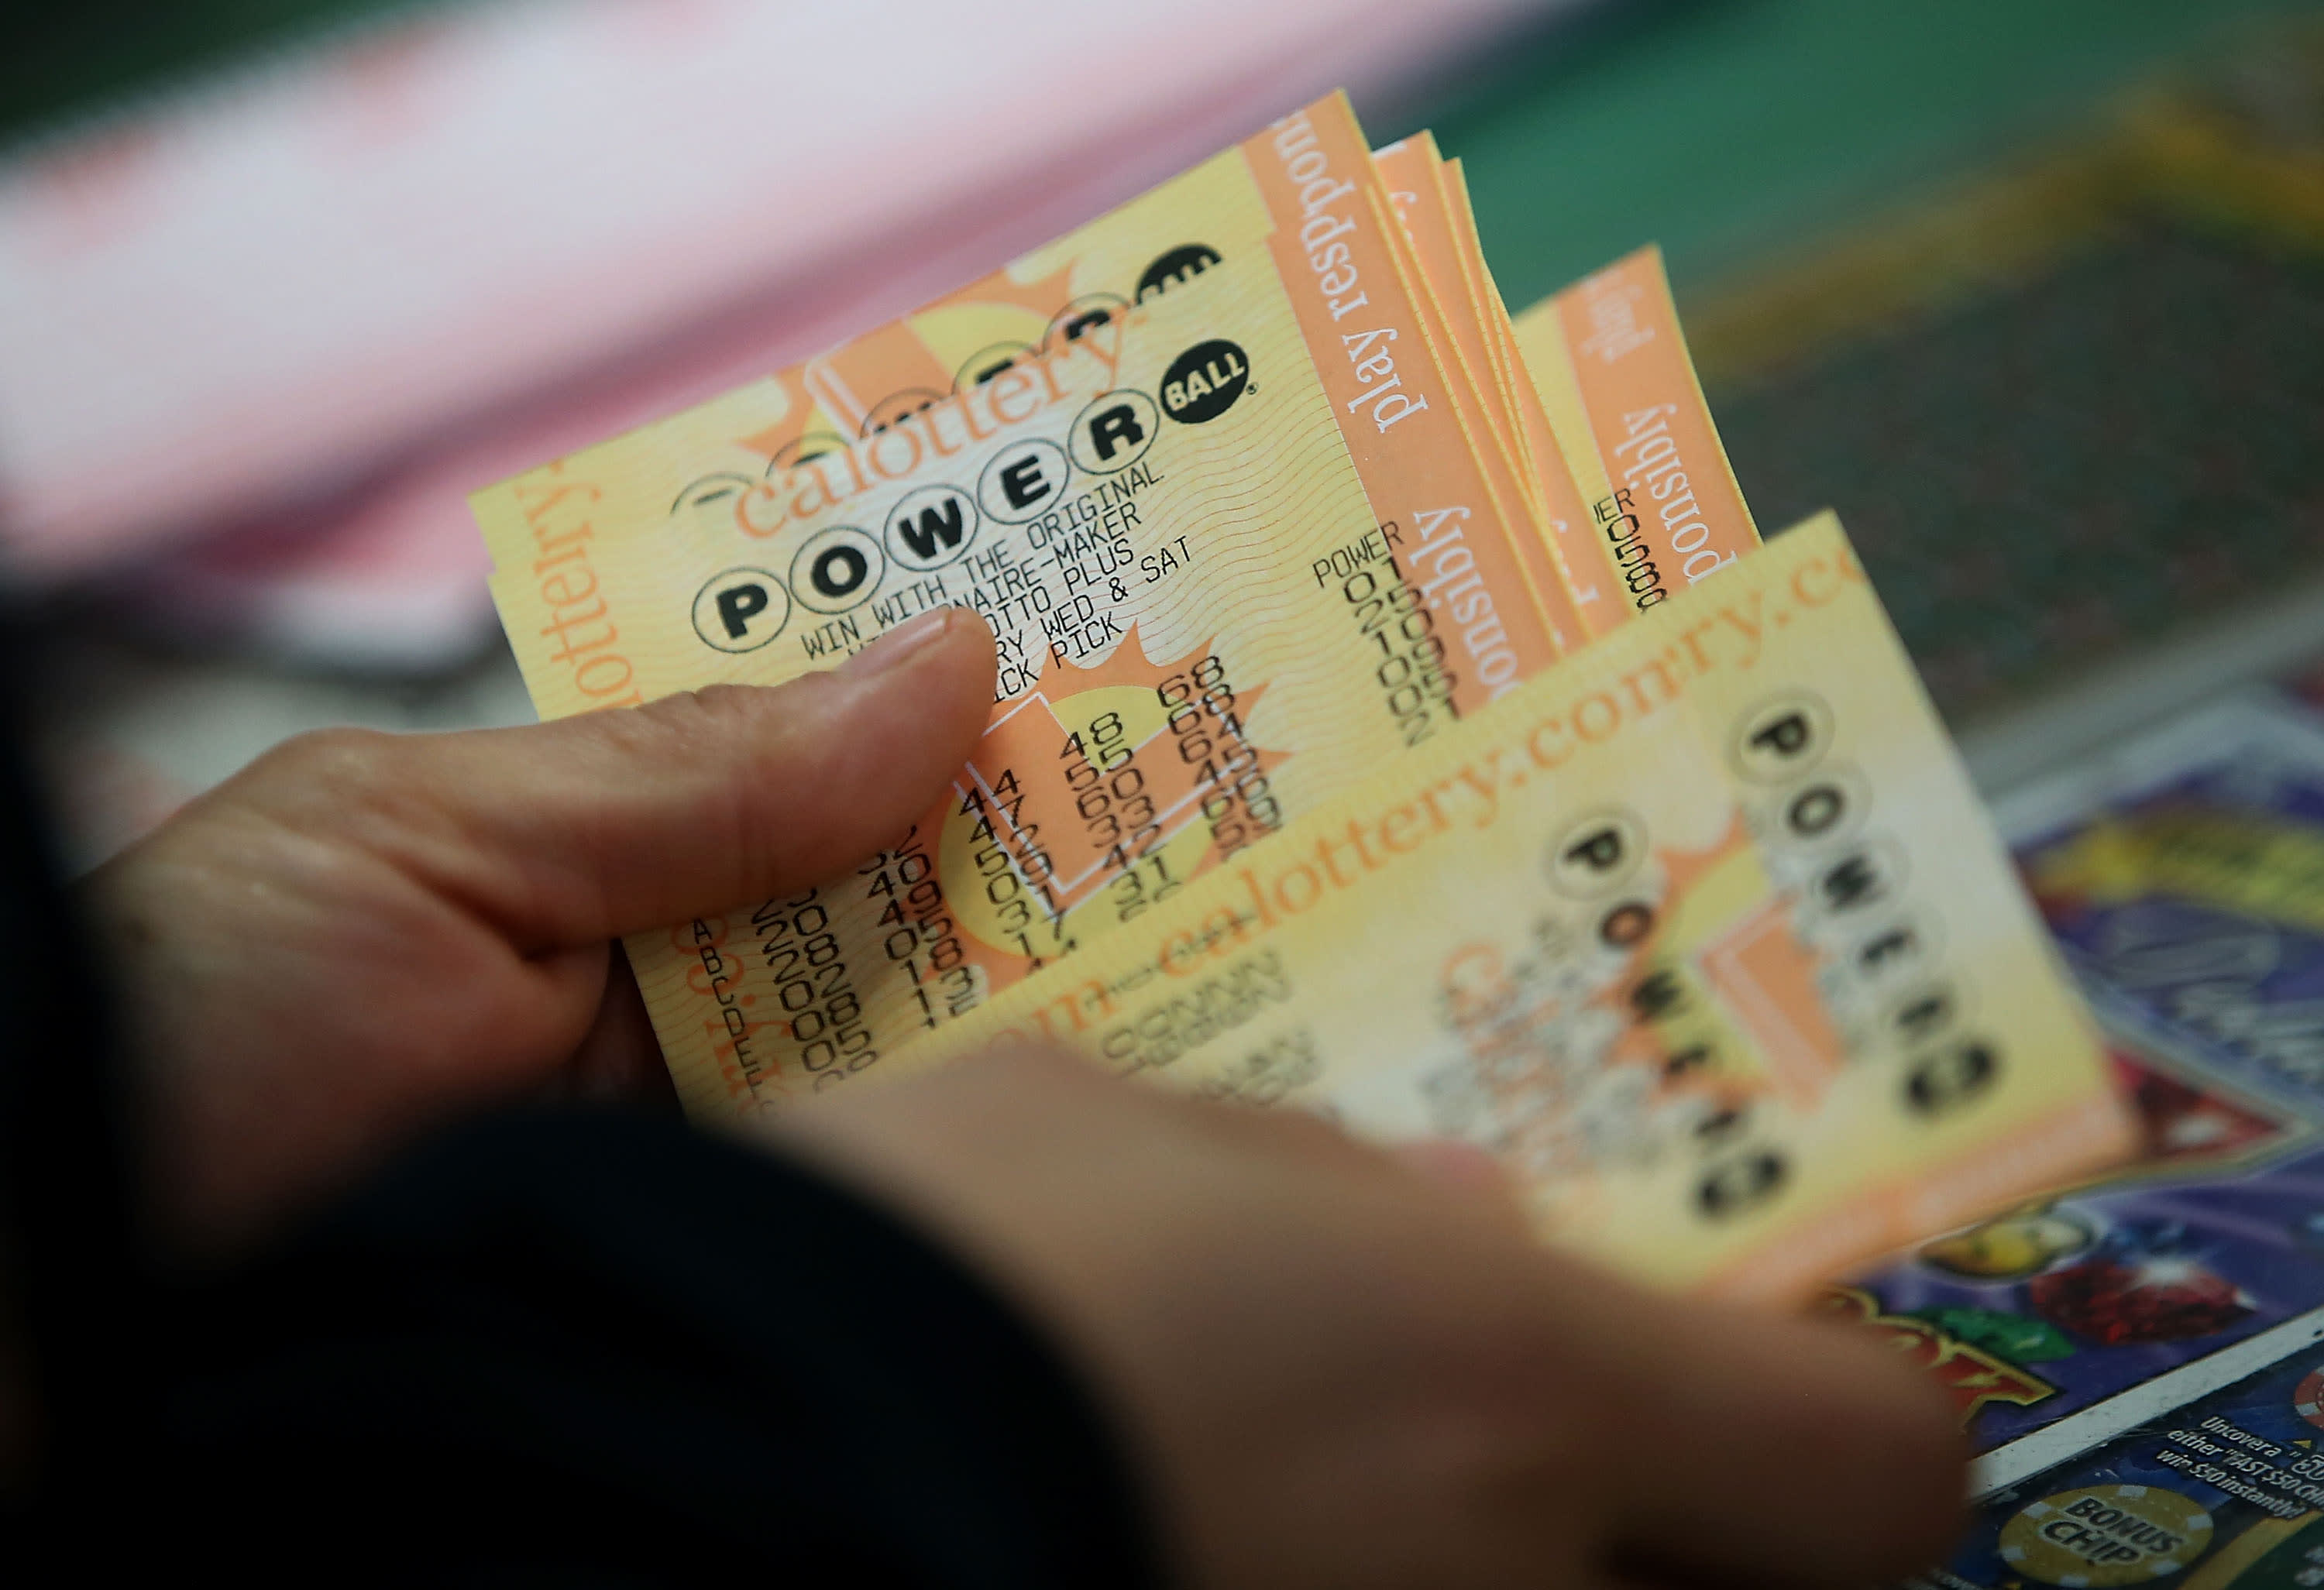 Missed the Powerball jackpot? Your ticket may still be a winner